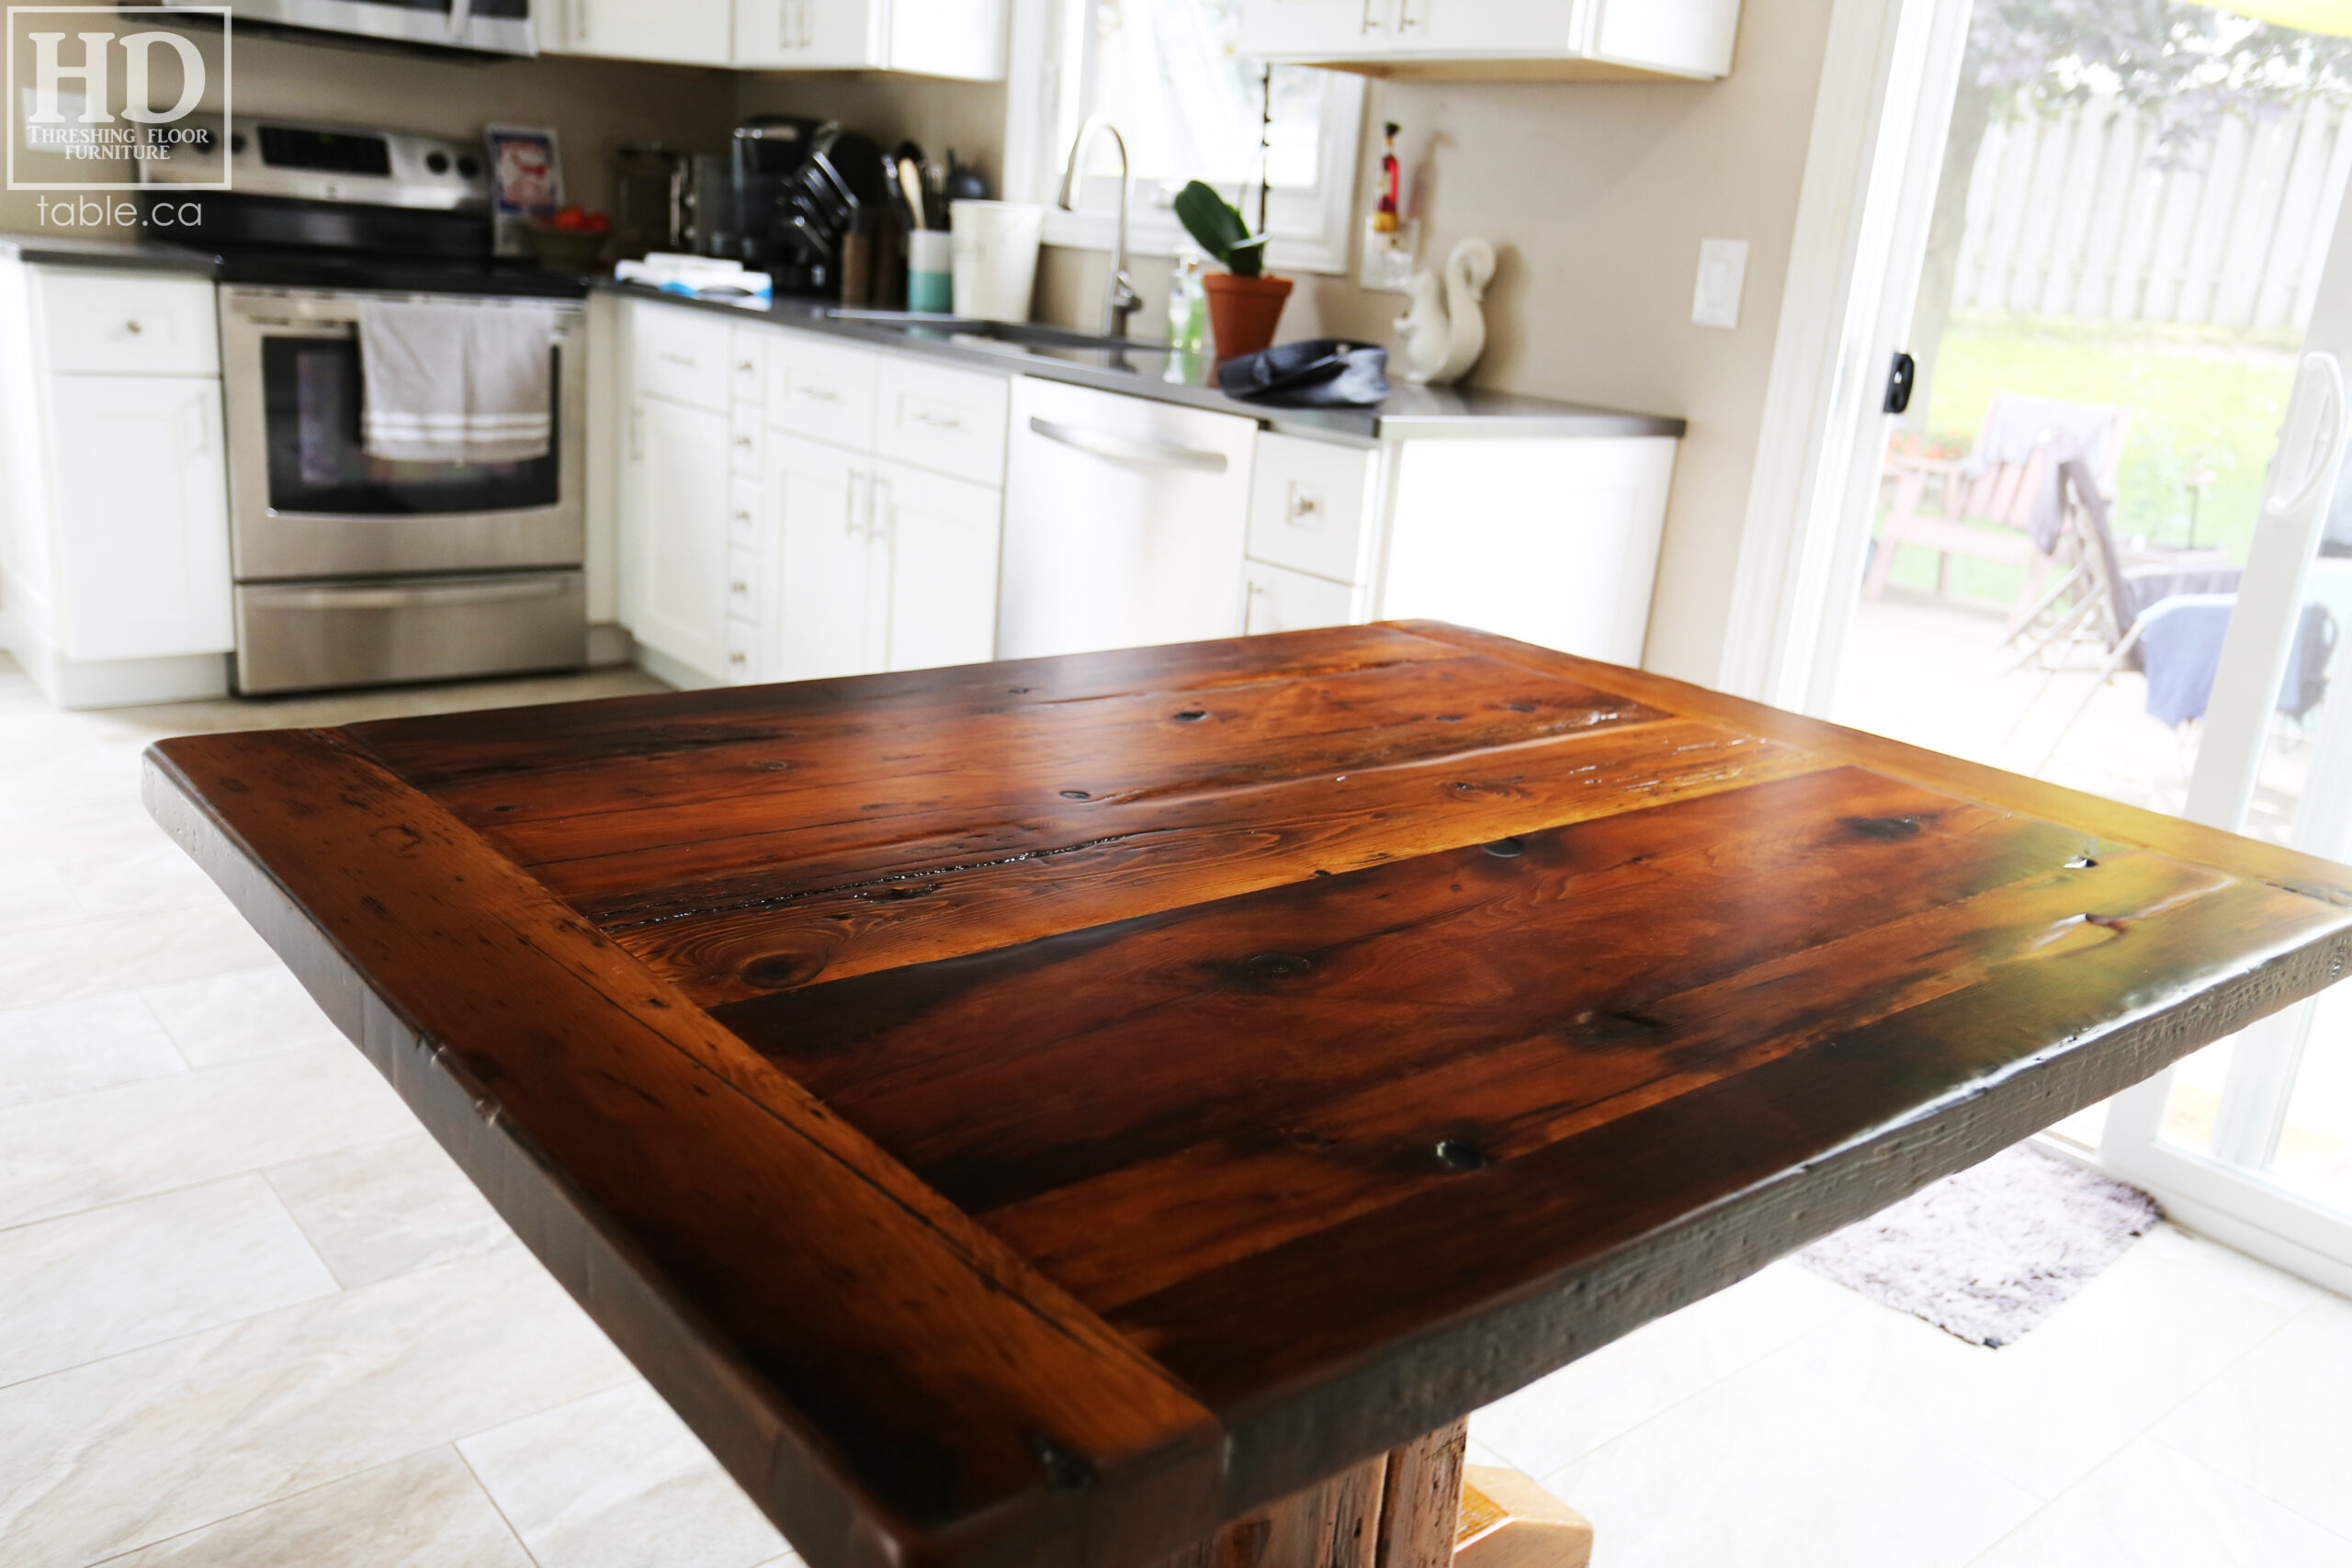 Reclaimed Wood Kitchen Table by HD Threshing Floor Furniture / www.table.ca